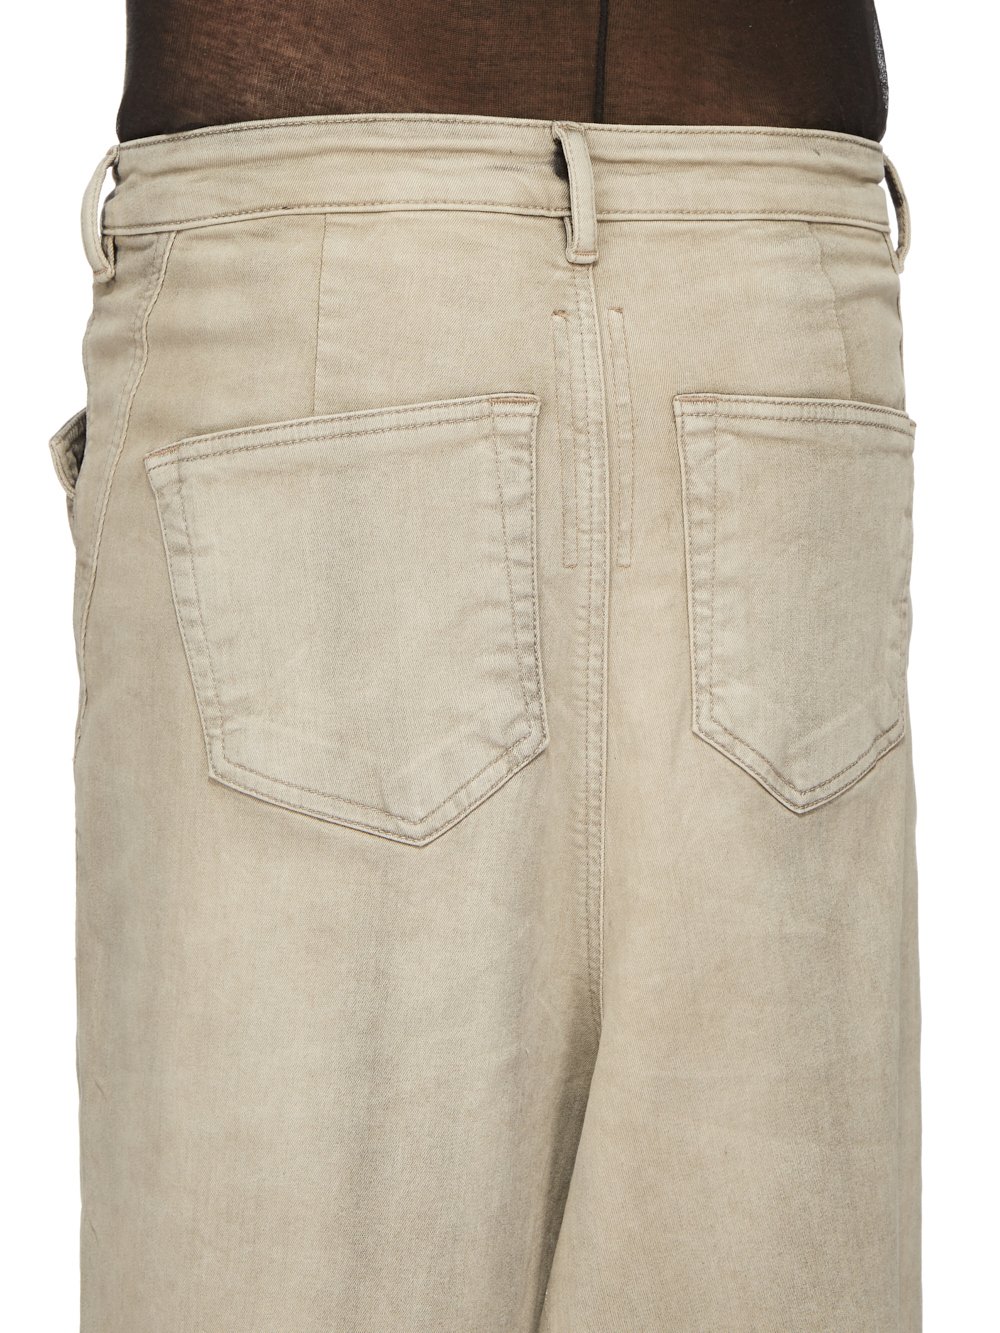 RICK OWENS FW23 LUXOR RUNWAY SLIVERED SKIRT IN MINERAL PEARL STRETCH DENIM FRINGED